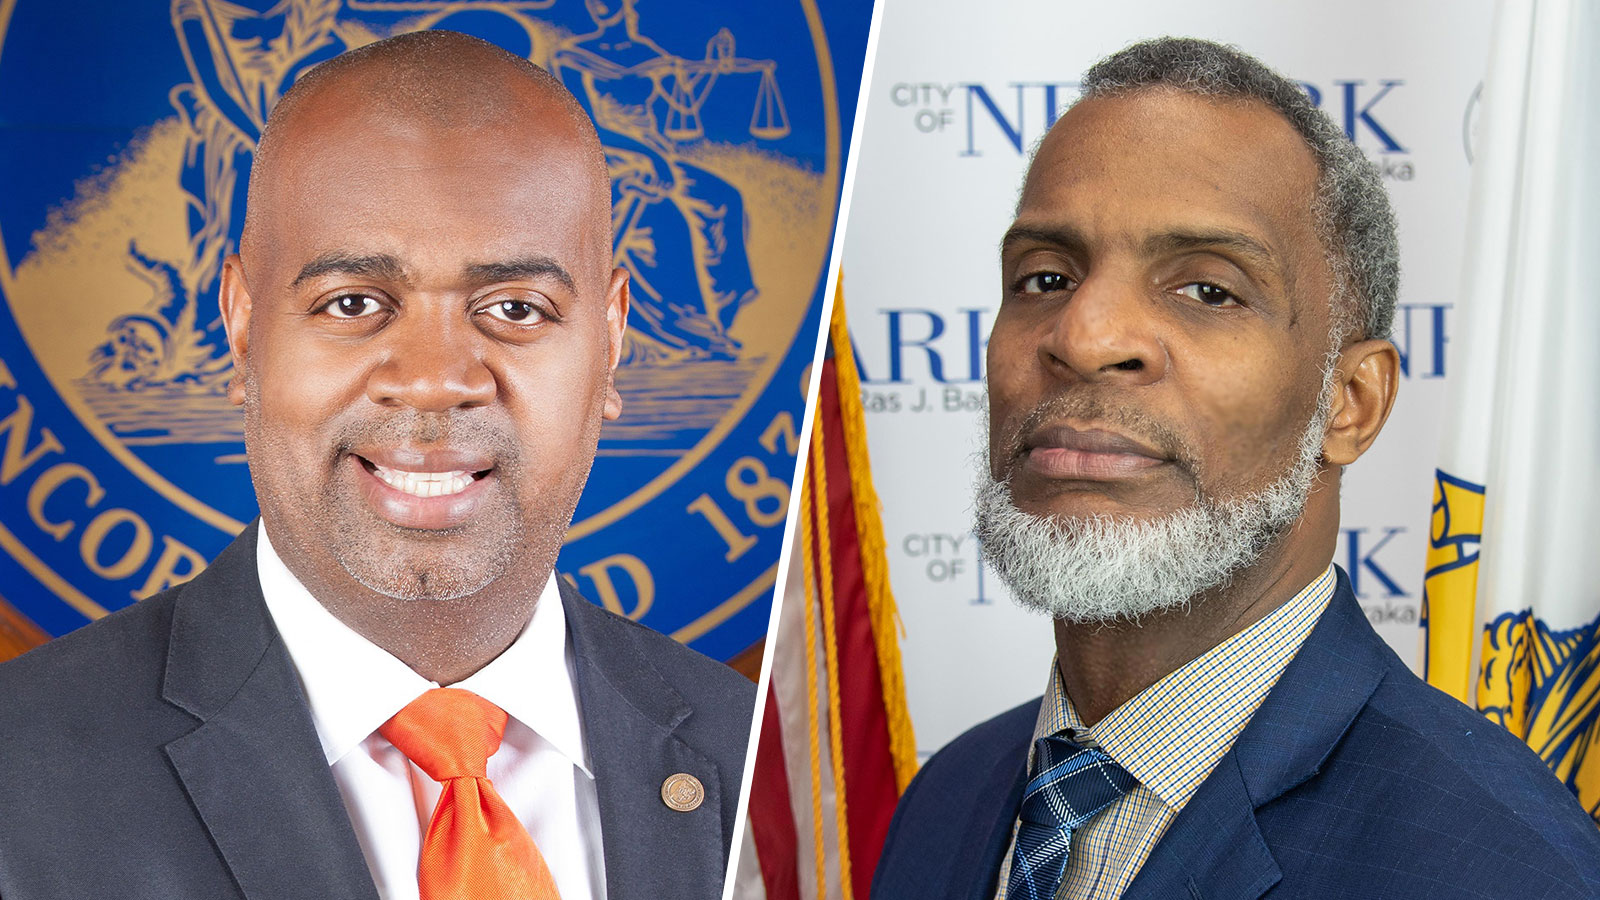 Mayor Baraka and Department of Water and Sewer Utilities Director Adeem Win Governor’s Environmental Excellence Award for Lead-Service Line Replacement Program